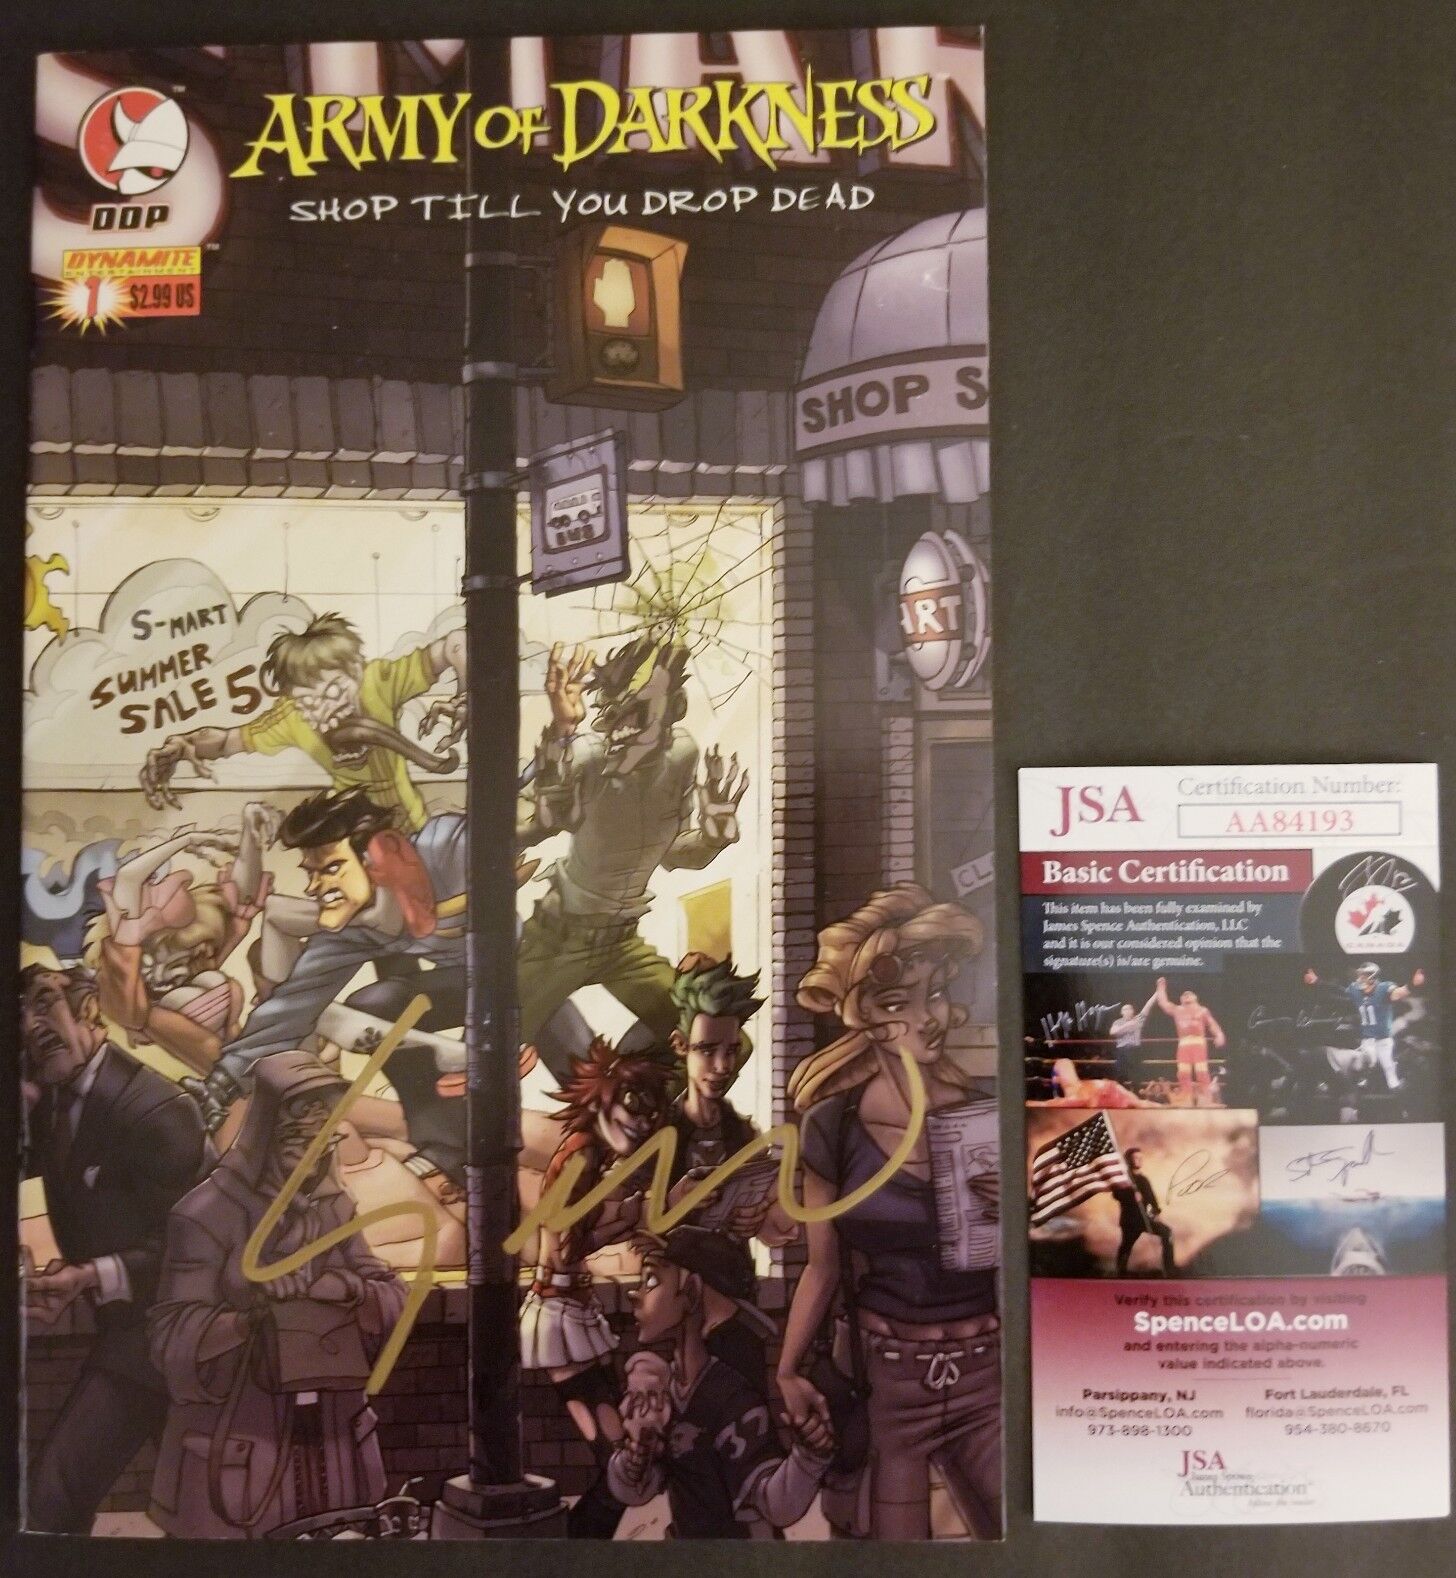 SAM RAIMI Authentic Hand-Signed ARMY OF DARKNESS SHOP TILL YOU DROP #1 (JSA COA)